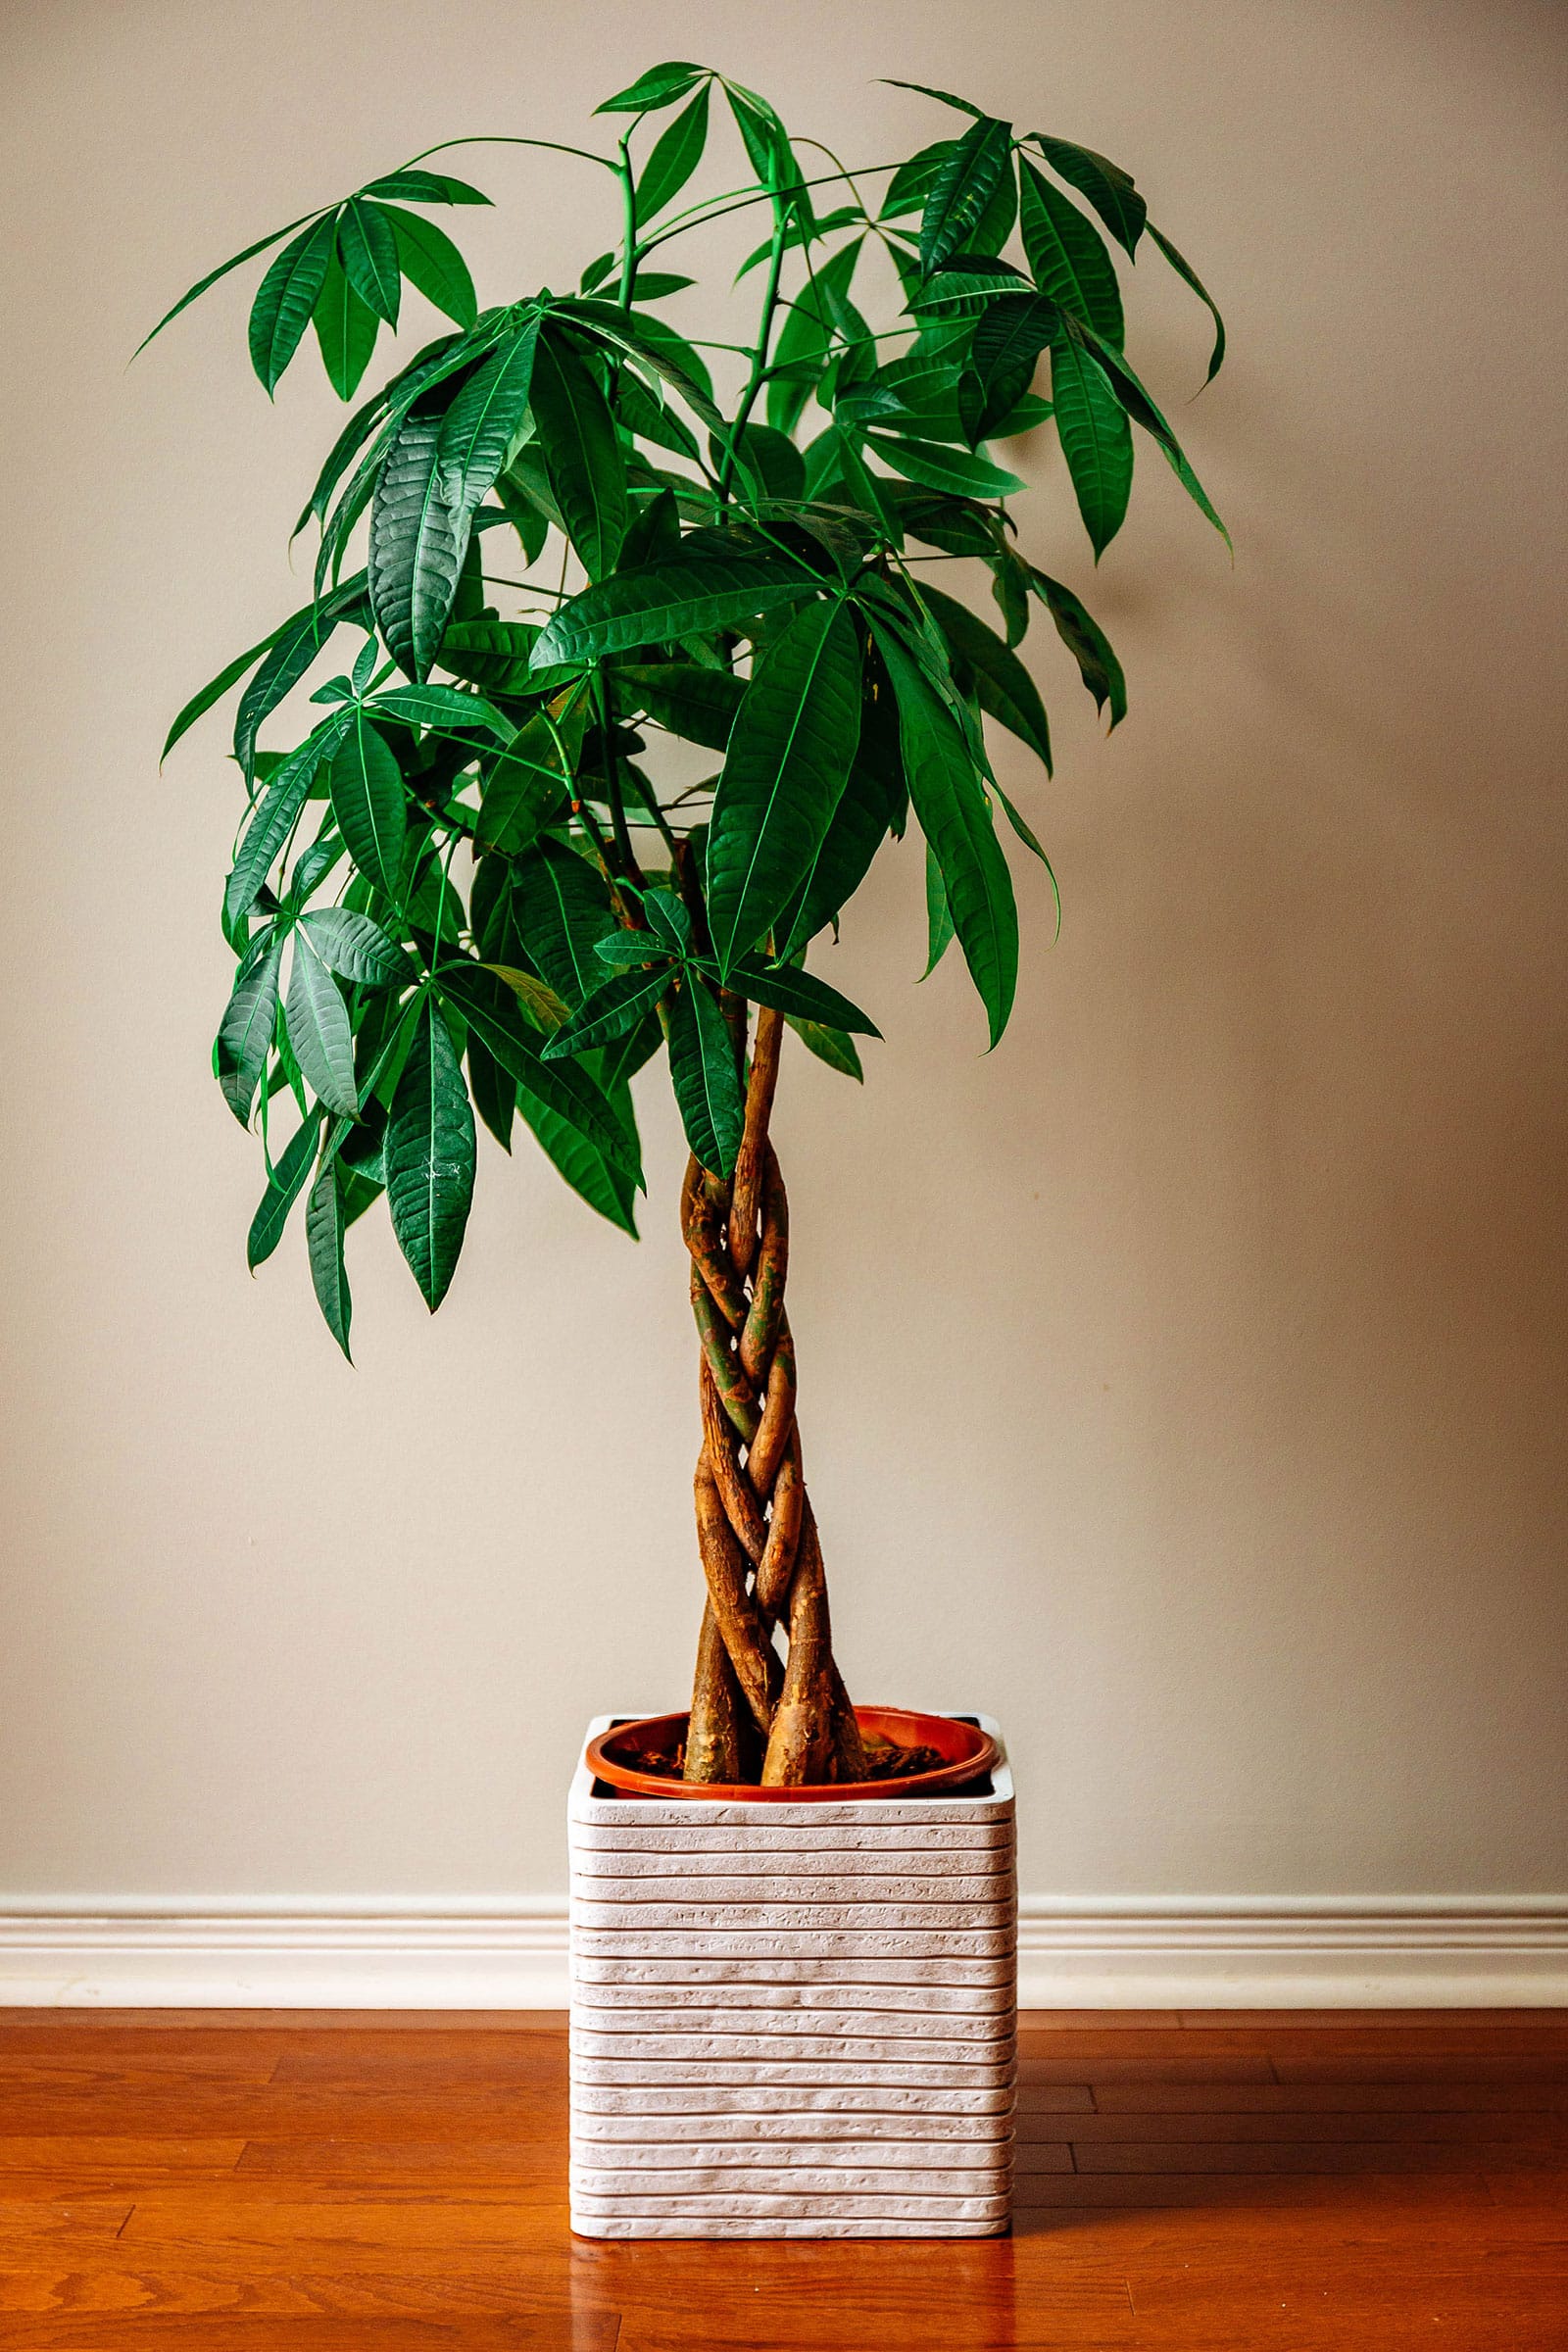 Pachira aquatica (money tree) with braided stem in a textured square pot against a wall